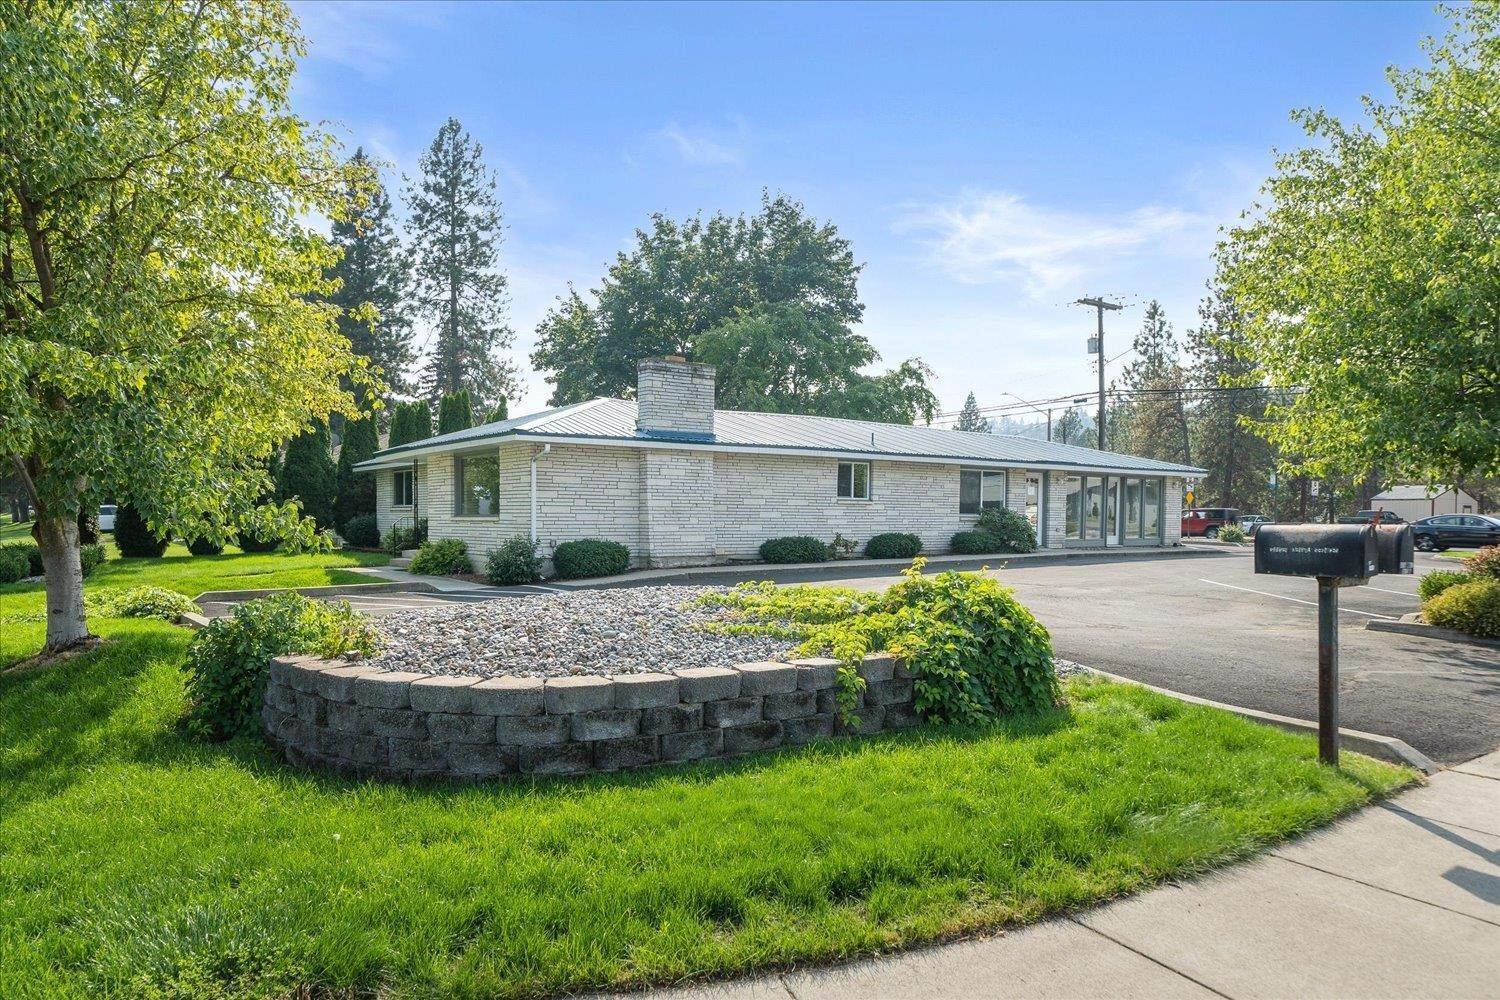 6. Commercial for Sale at 8306 N Wall Street Spokane, Washington 99208 United States